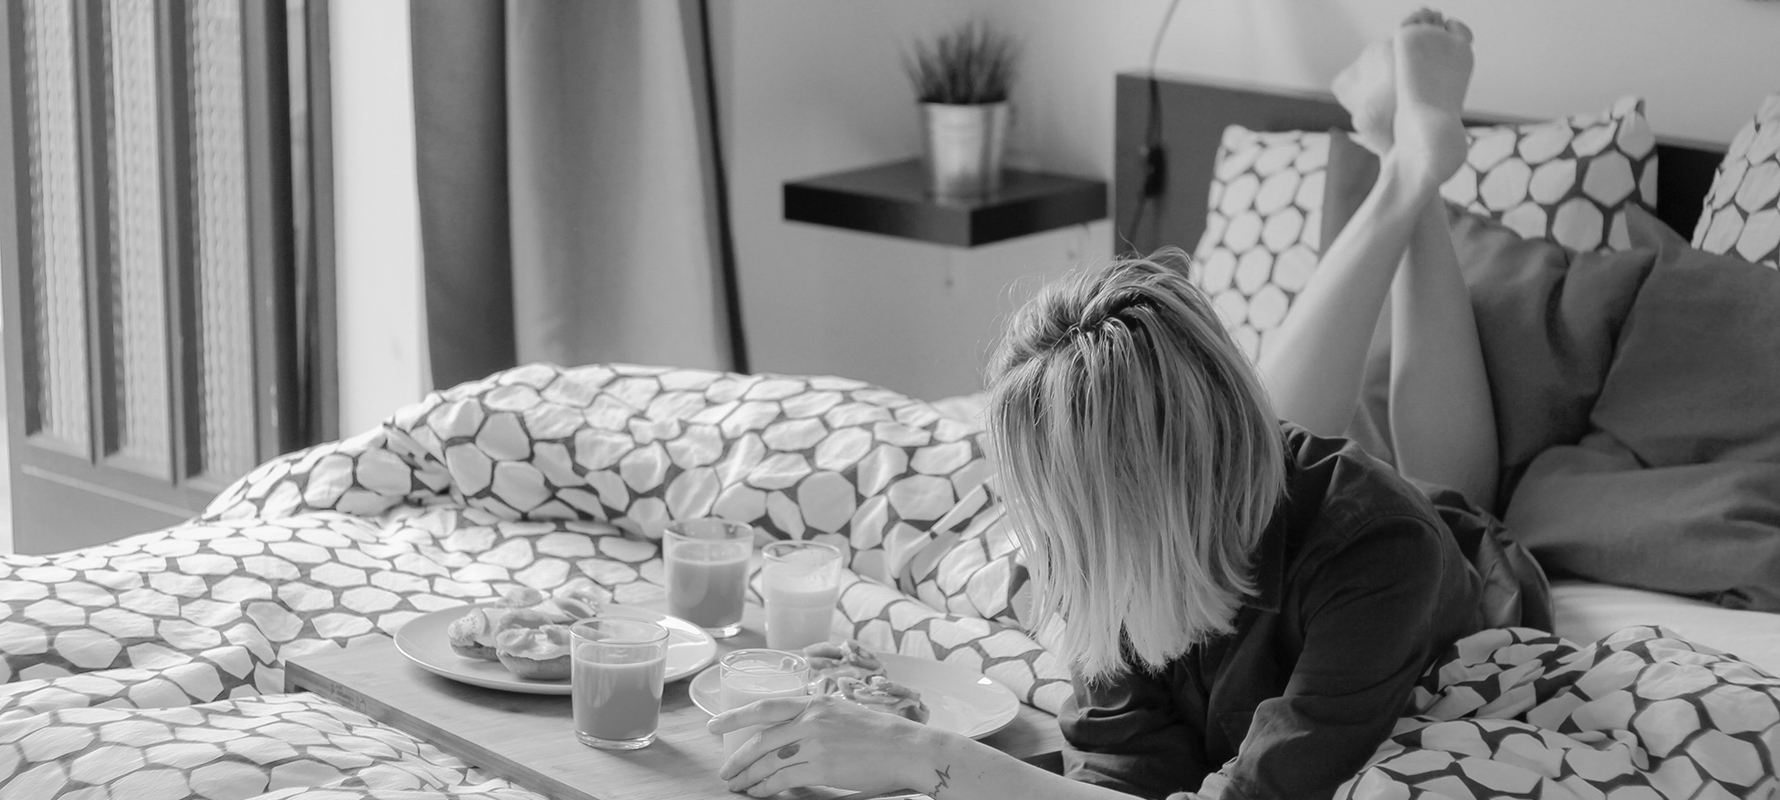 A woman eating breakfast in bed.